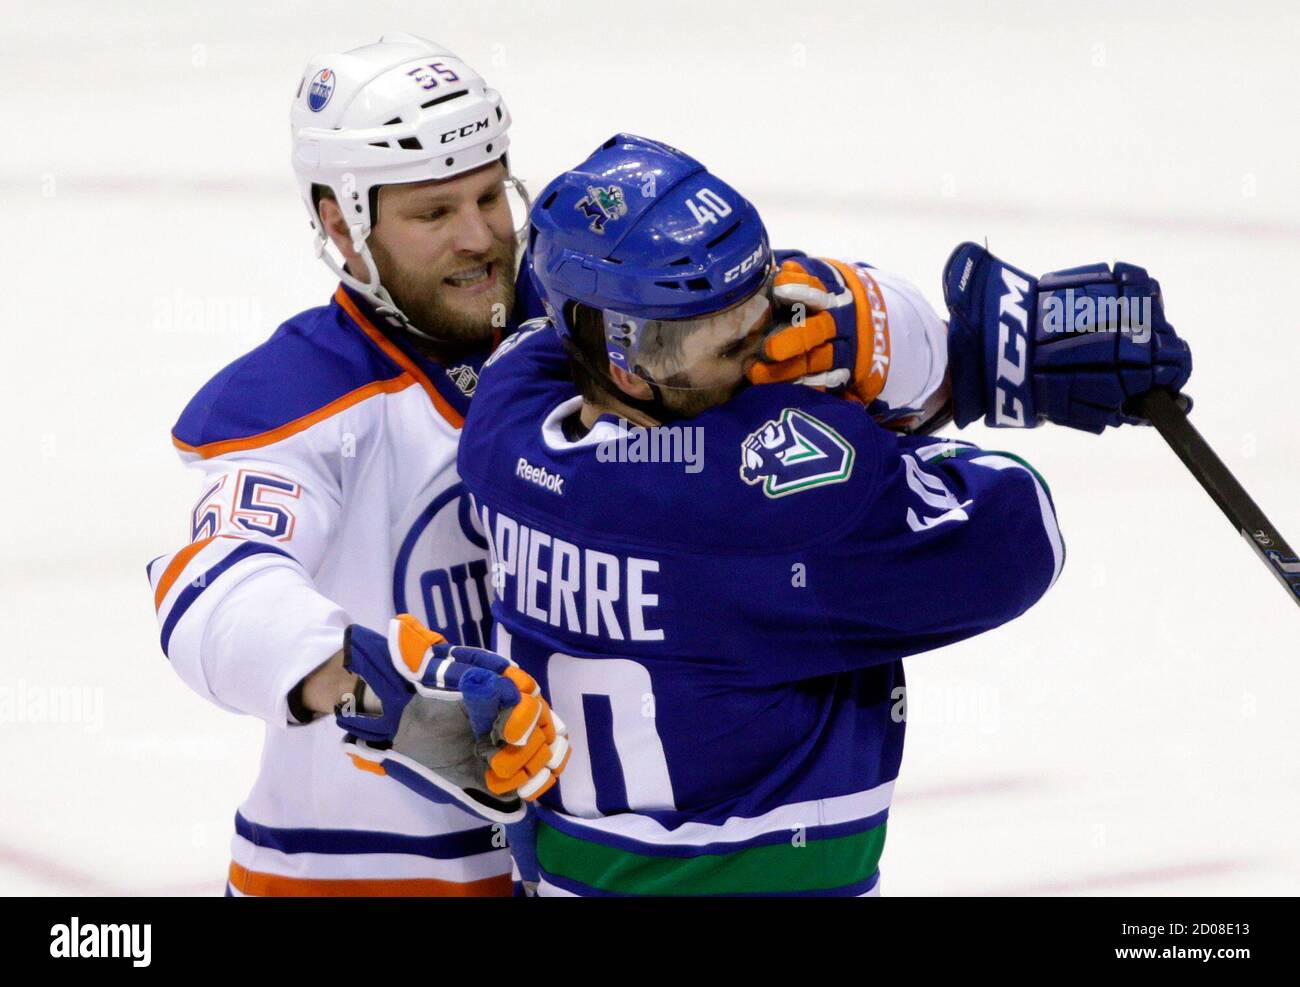 Vancouver Canucks' Maxim Lapierre (R) is roughed up by Edmonton Oilers' Ben Eager during the second period of their NHL hockey game in Vancouver, British Columbia April 7, 2012. REUTERS/Ben Nelms (CANADA - Tags: SPORT ICE HOCKEY) Stock Photo